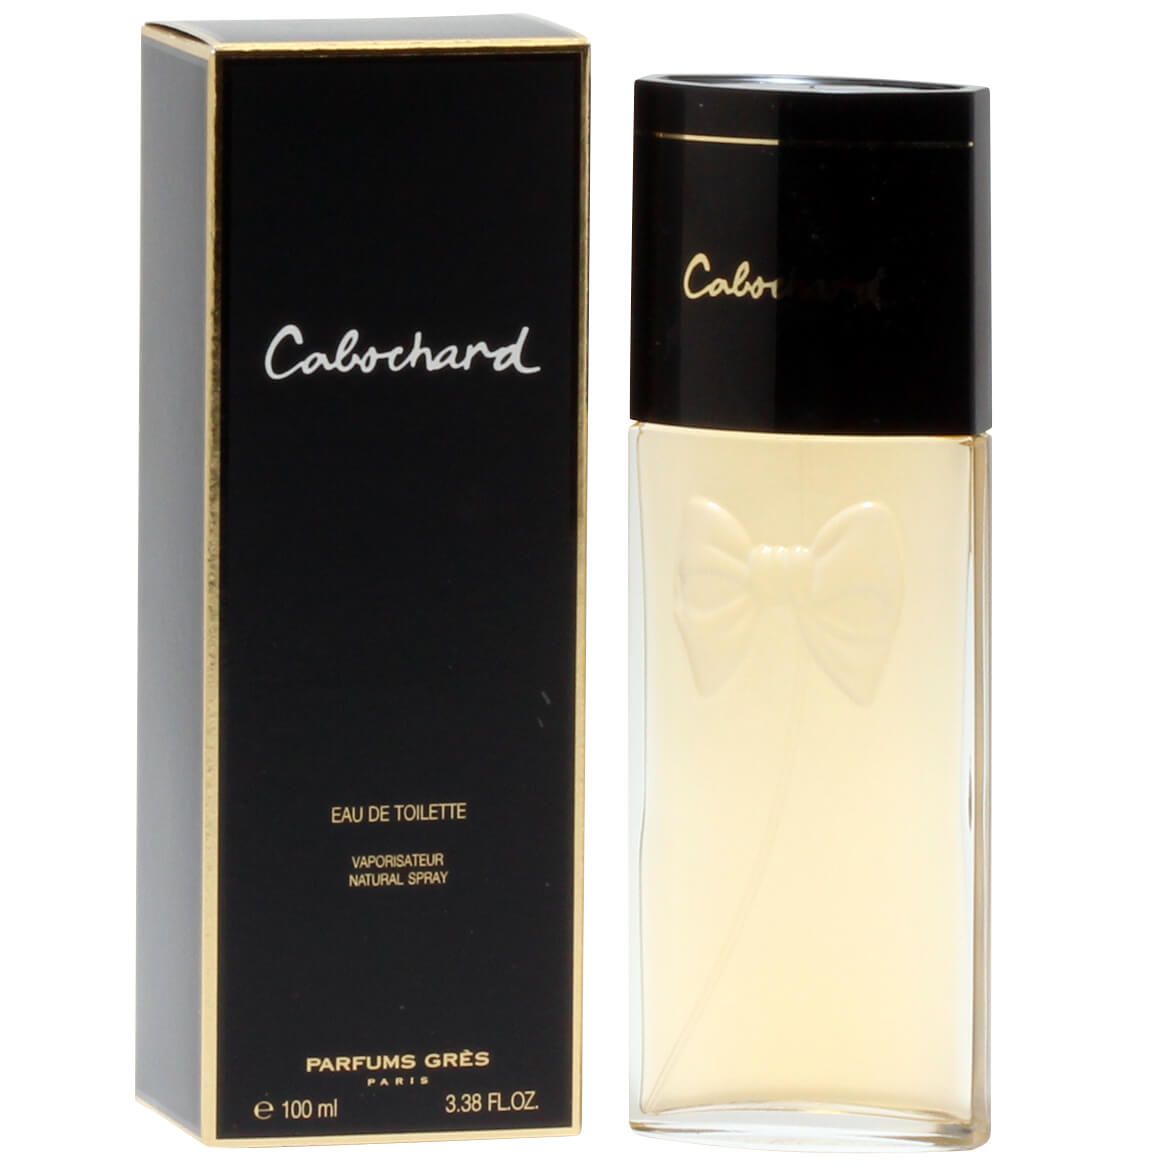 Cabochard by Parfums Gres EDT Spray + '-' + 350282